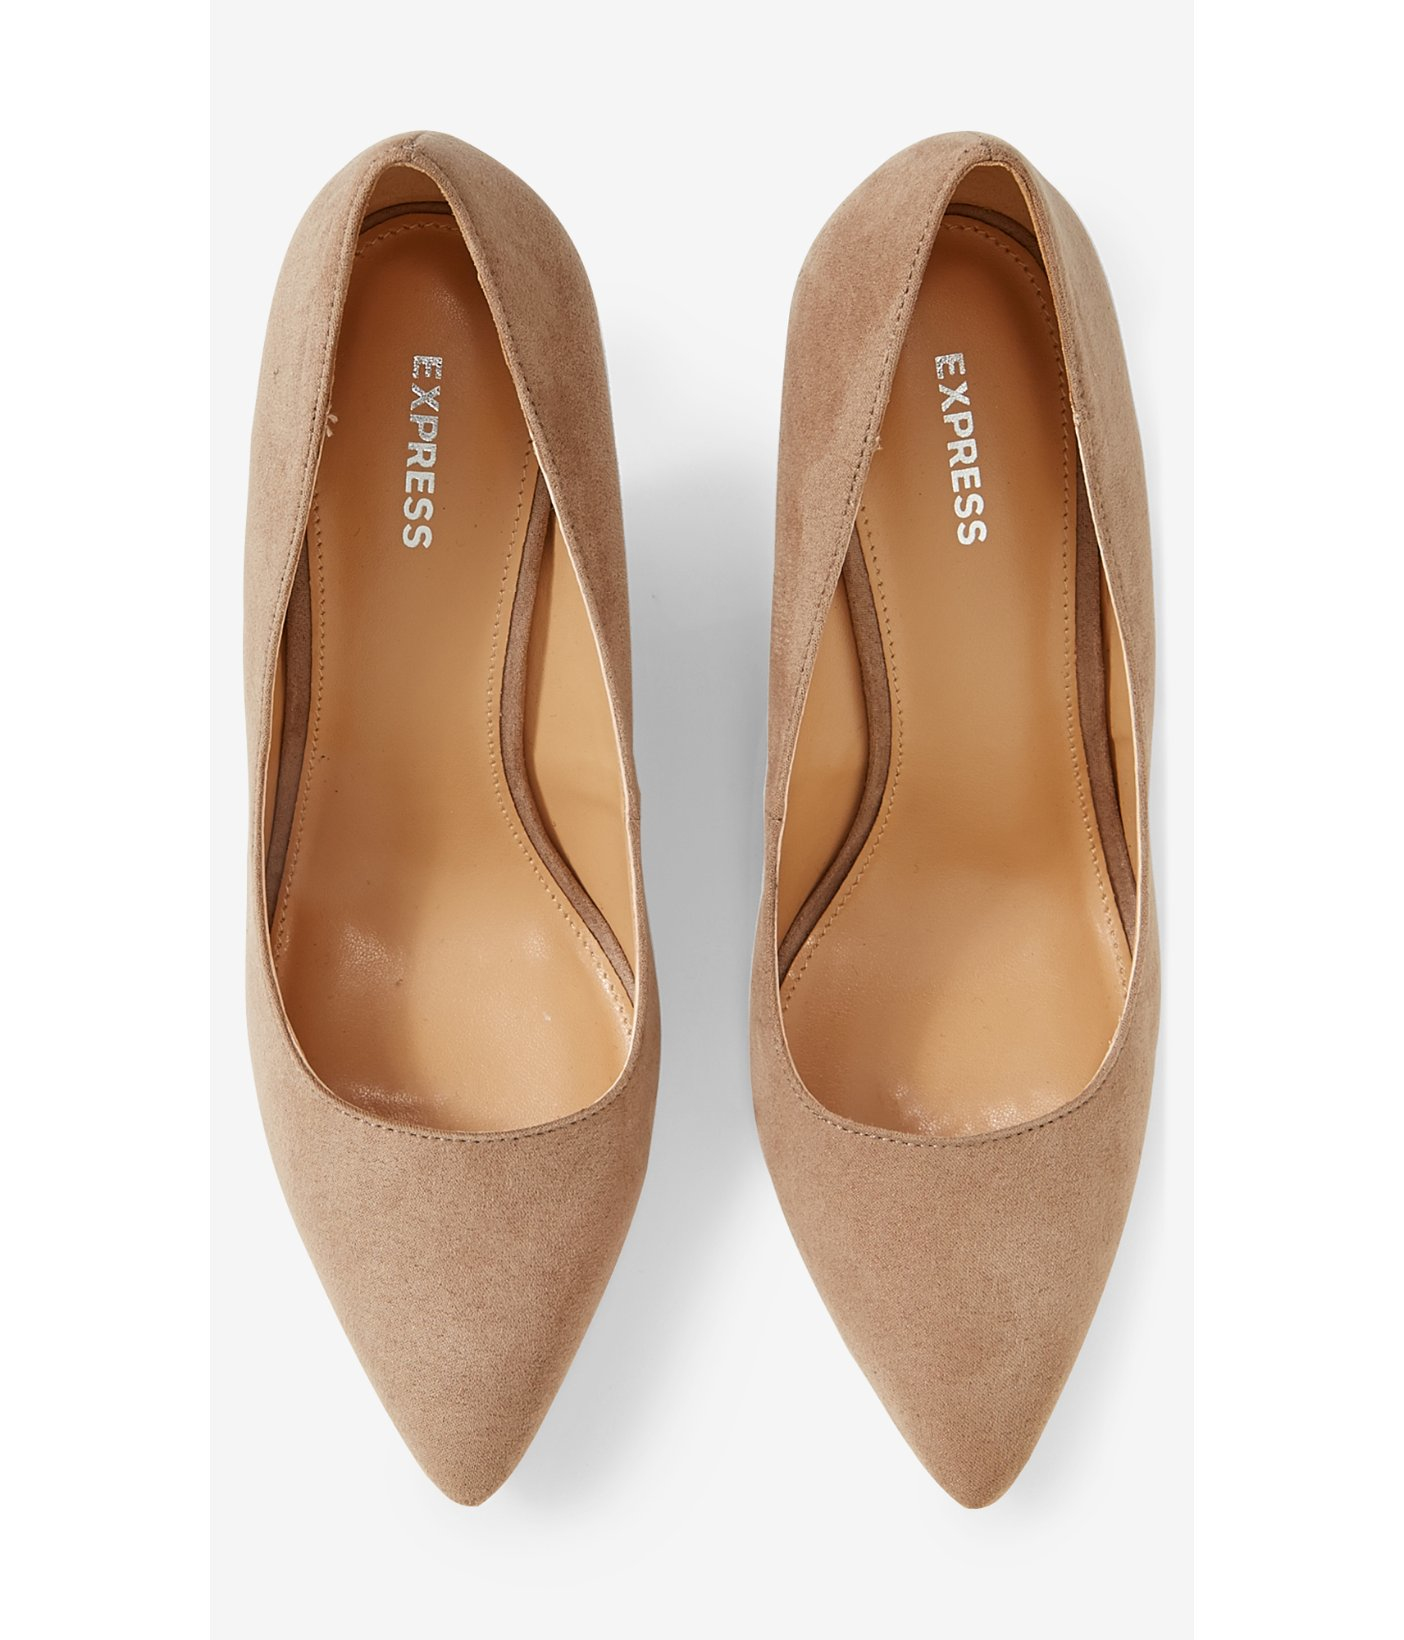 Lyst - Express Tan Faux Suede Pointed Toe Wedge Pump in Brown